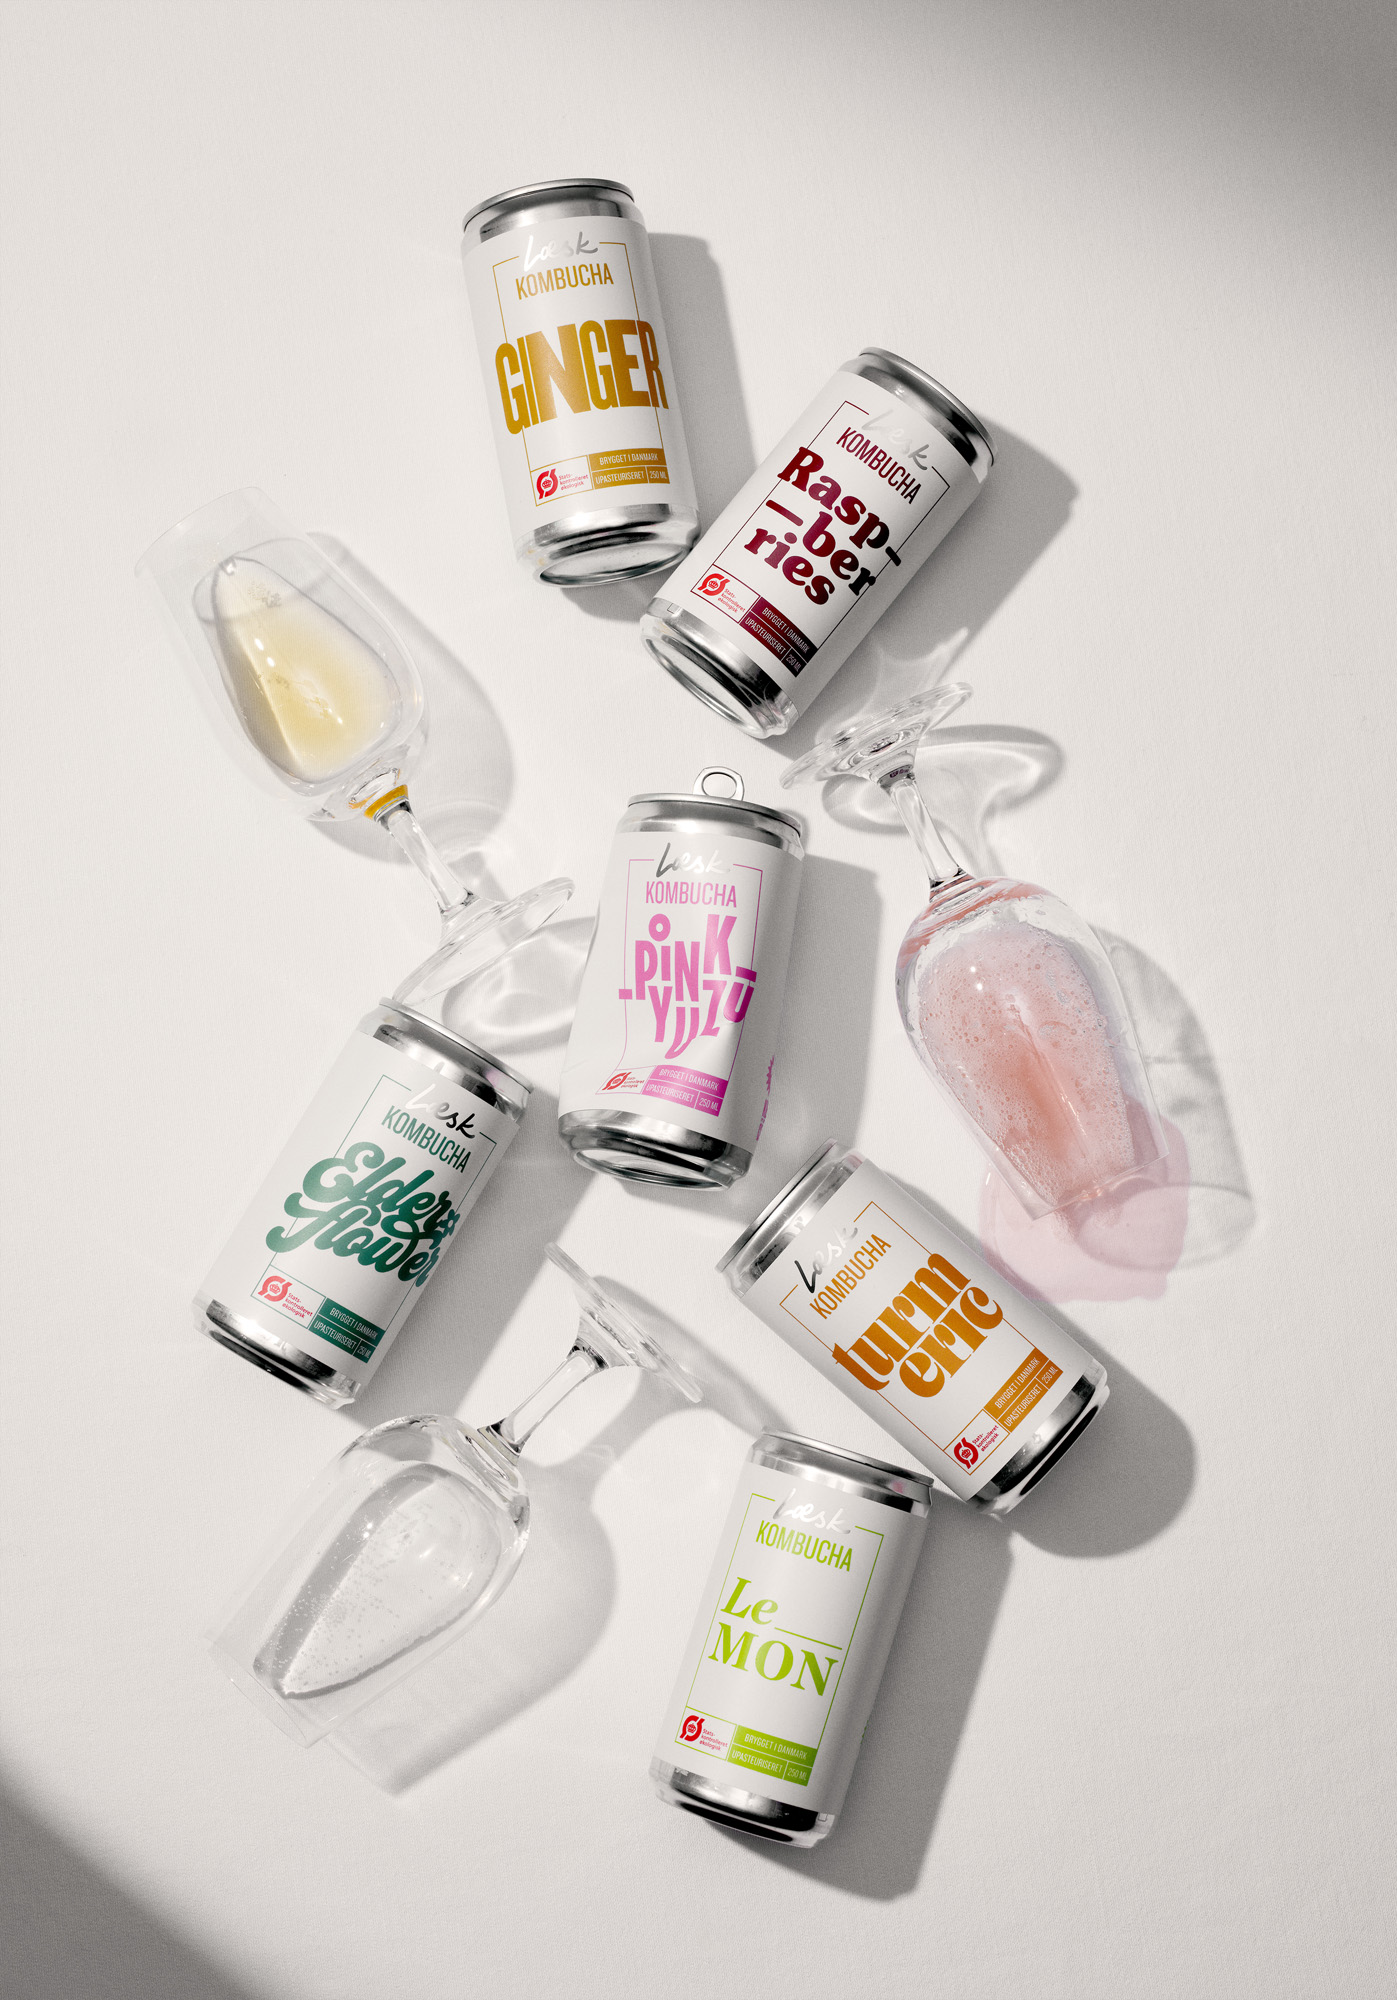 Læsk Branding and Packaging Design – A Thirst-Quenching Revolution